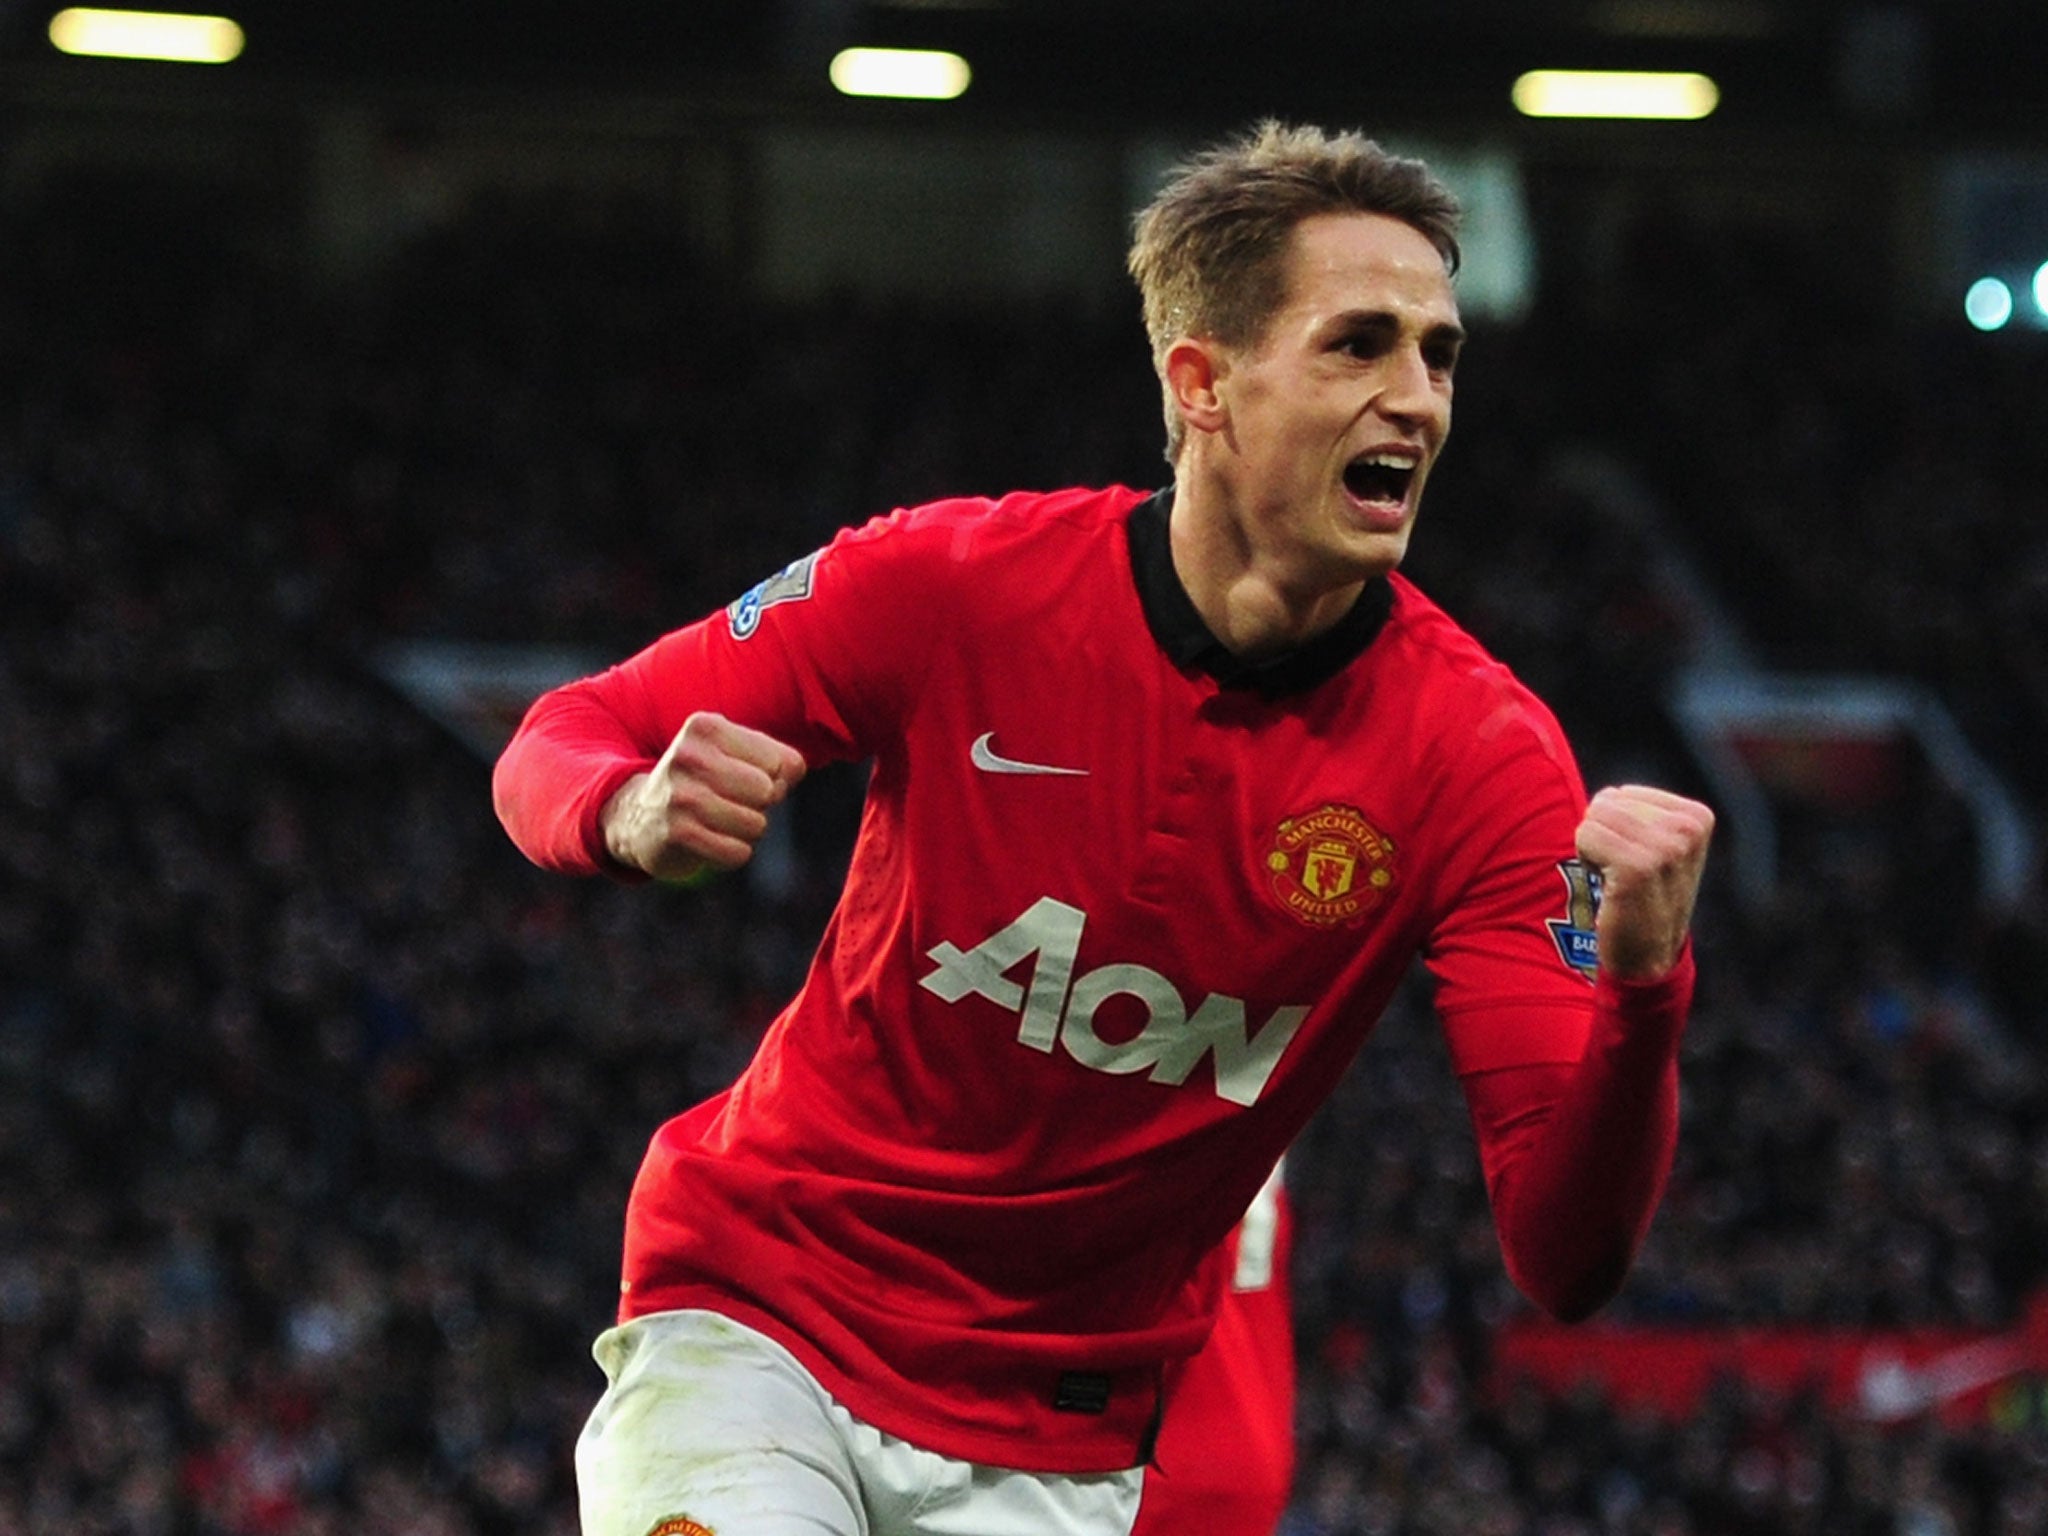 The rise of Adnan Januzaj is in line with United's tradition of giving youth its chance